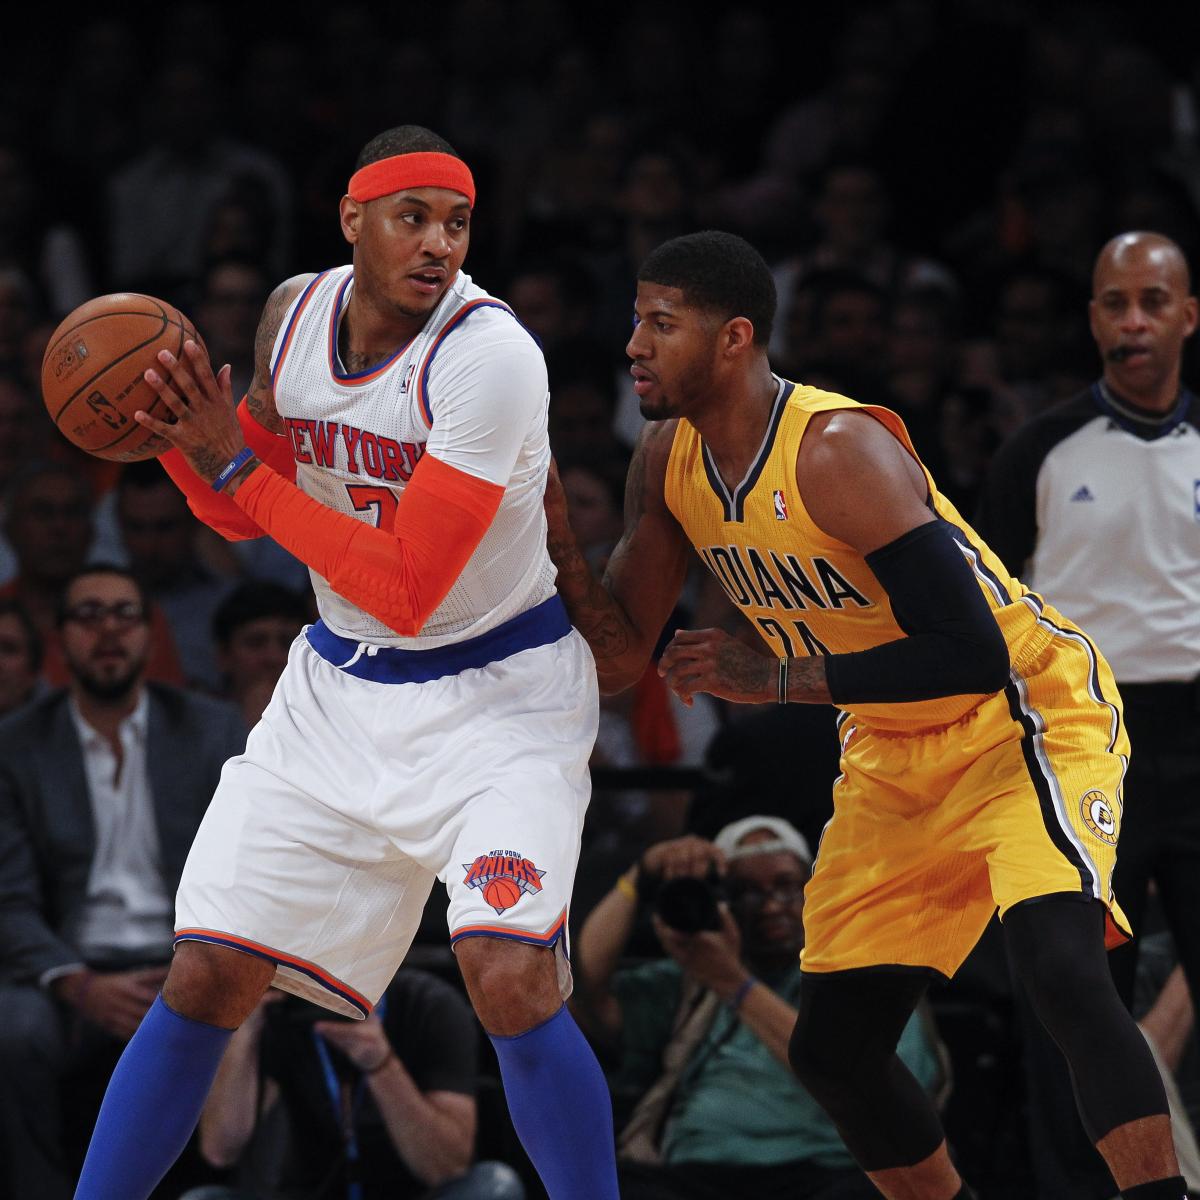 Pacers vs. Knicks Game 3 Viewing Info and Preview for Crucial Matchup